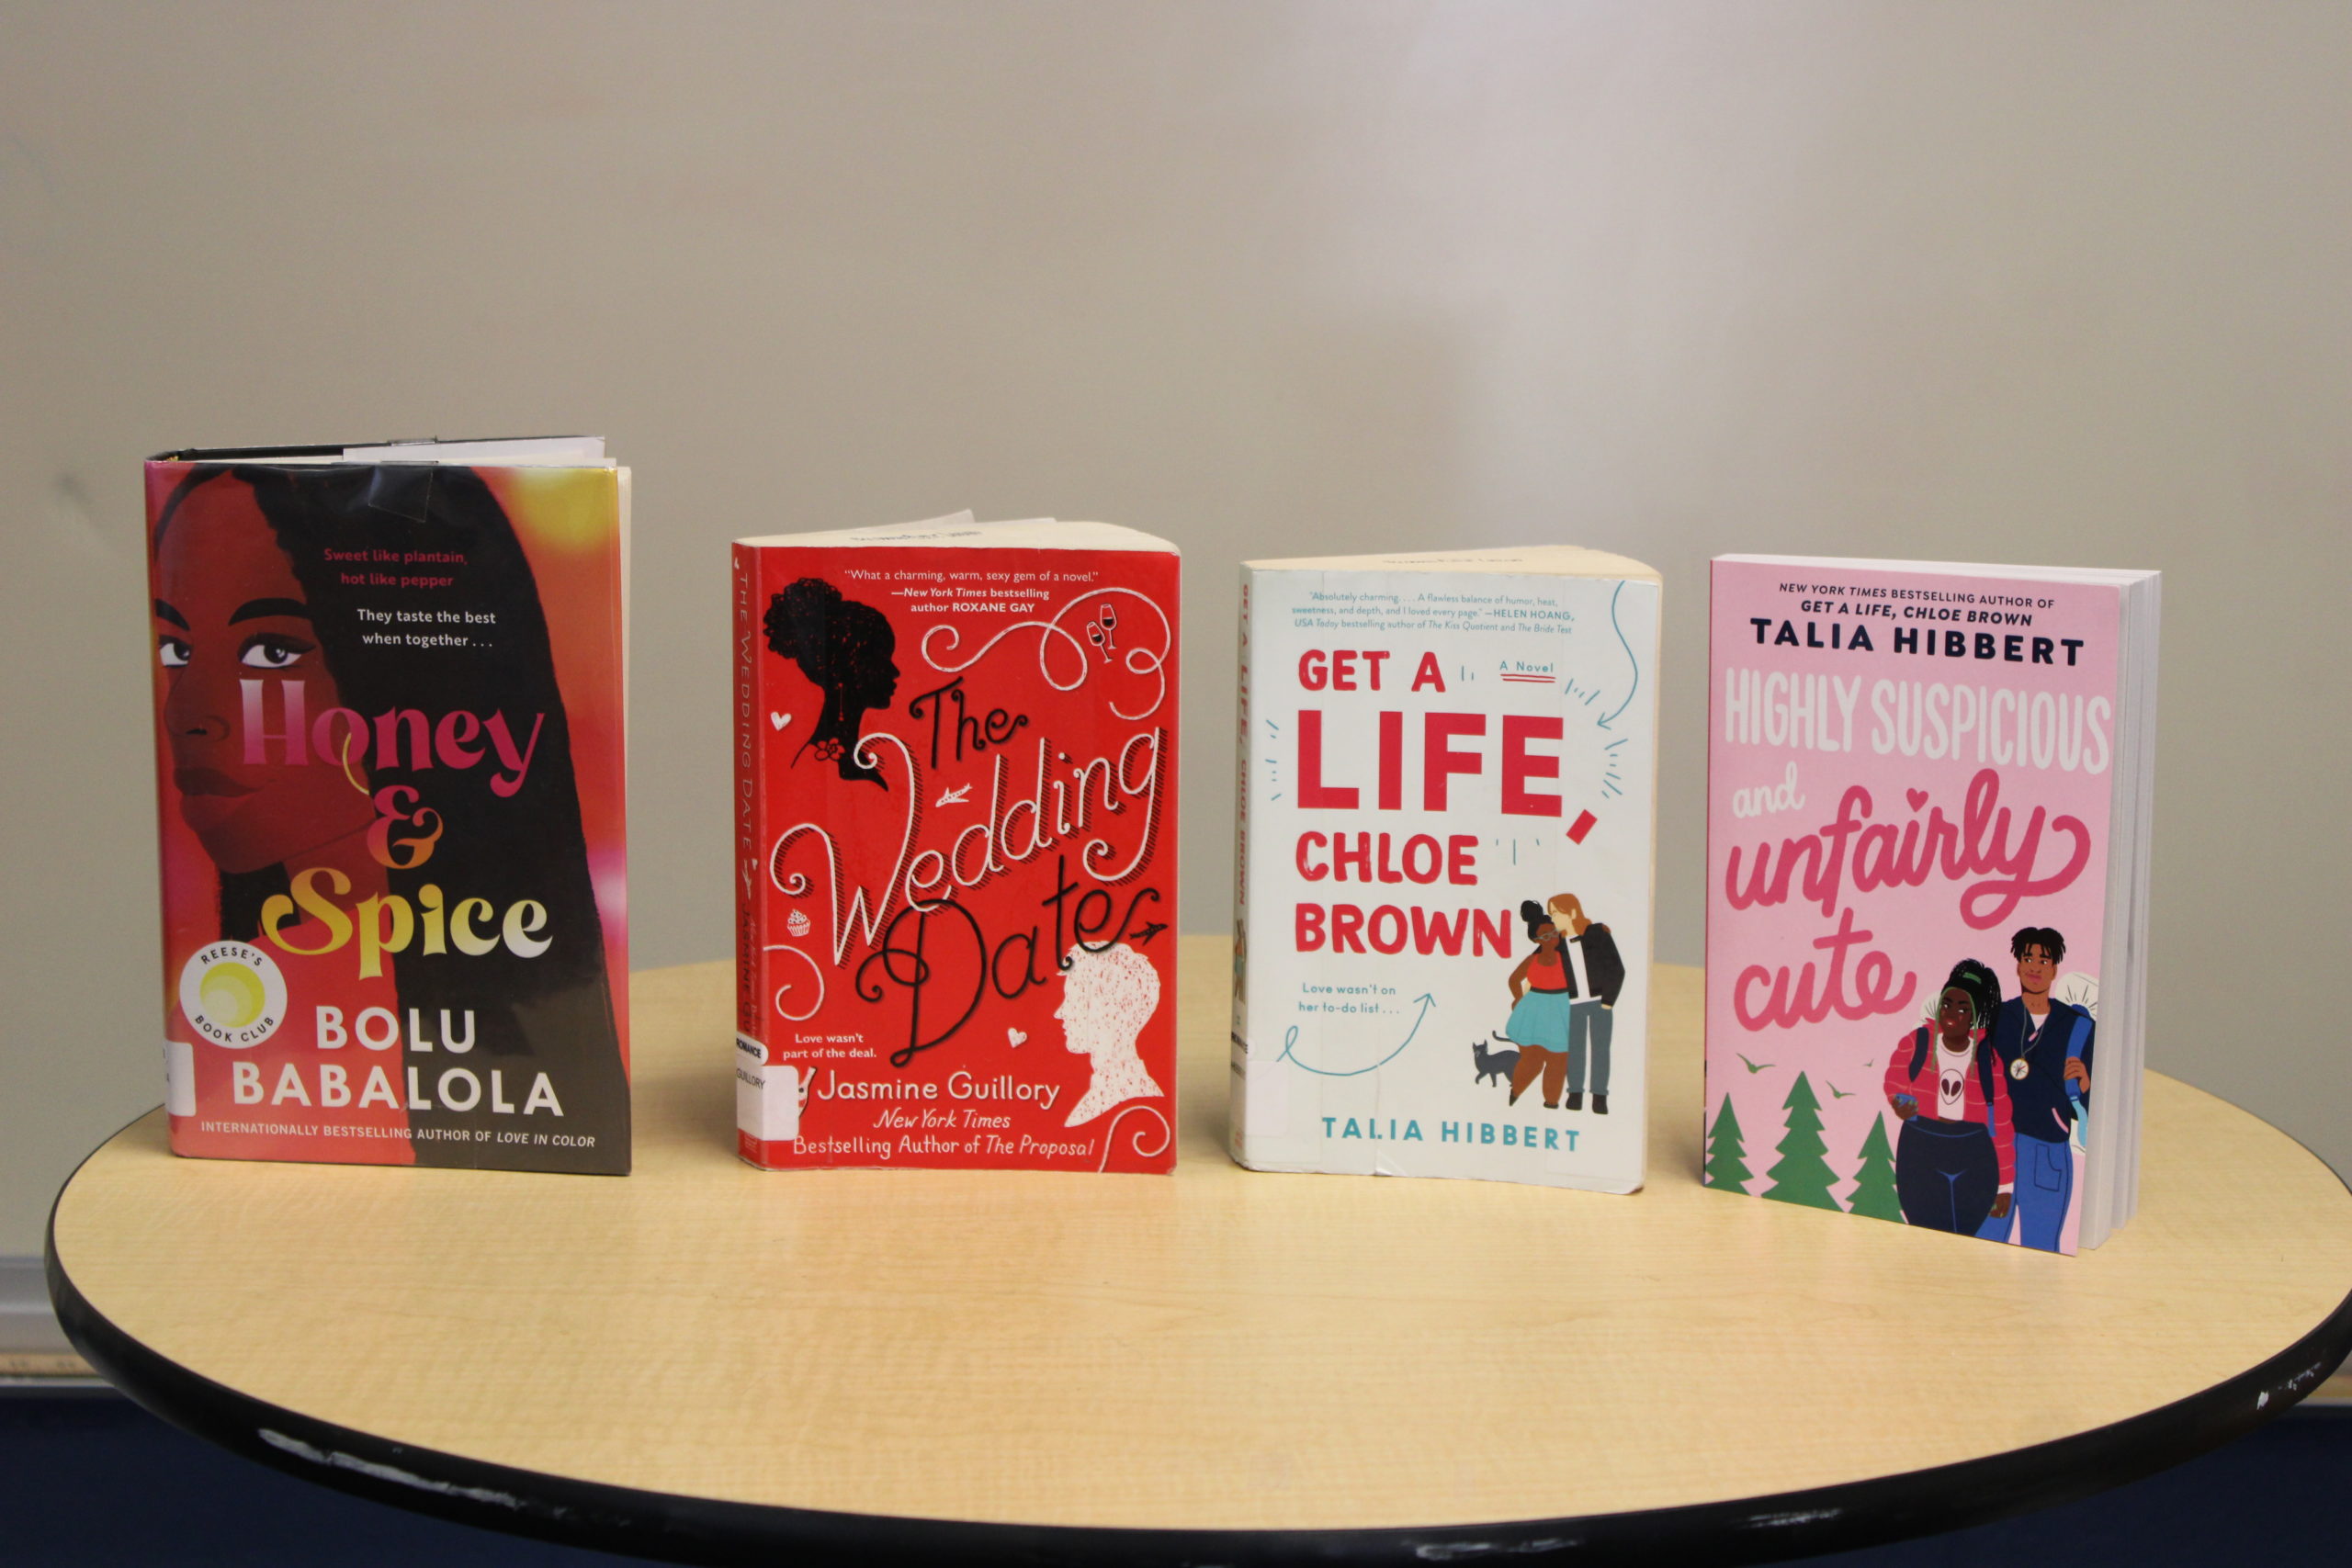 Listed from left to right: Honey & Spice by Bolu Babalola, The Wedding Date by Jasmine Guillory, Get a Life, Chloe Brown by Talia Hibbert, Highly Suspicious and Unfairly Cute by Talia Hibbert